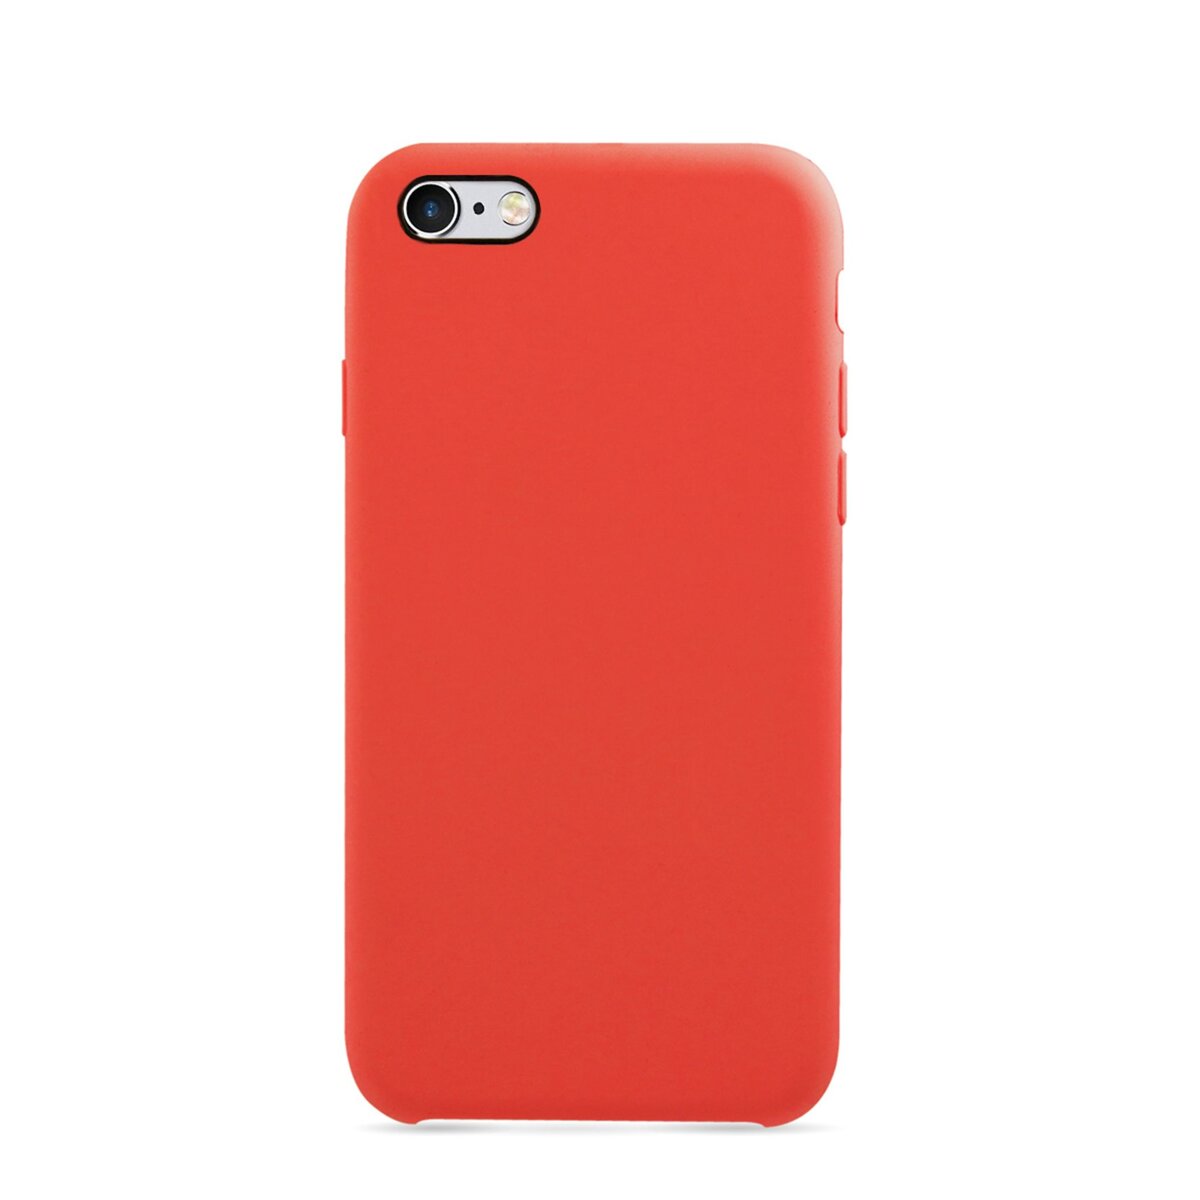 MOXIE Coque BeFluo pour Iphone 6 - Rouge - Polycarbonate et silicone